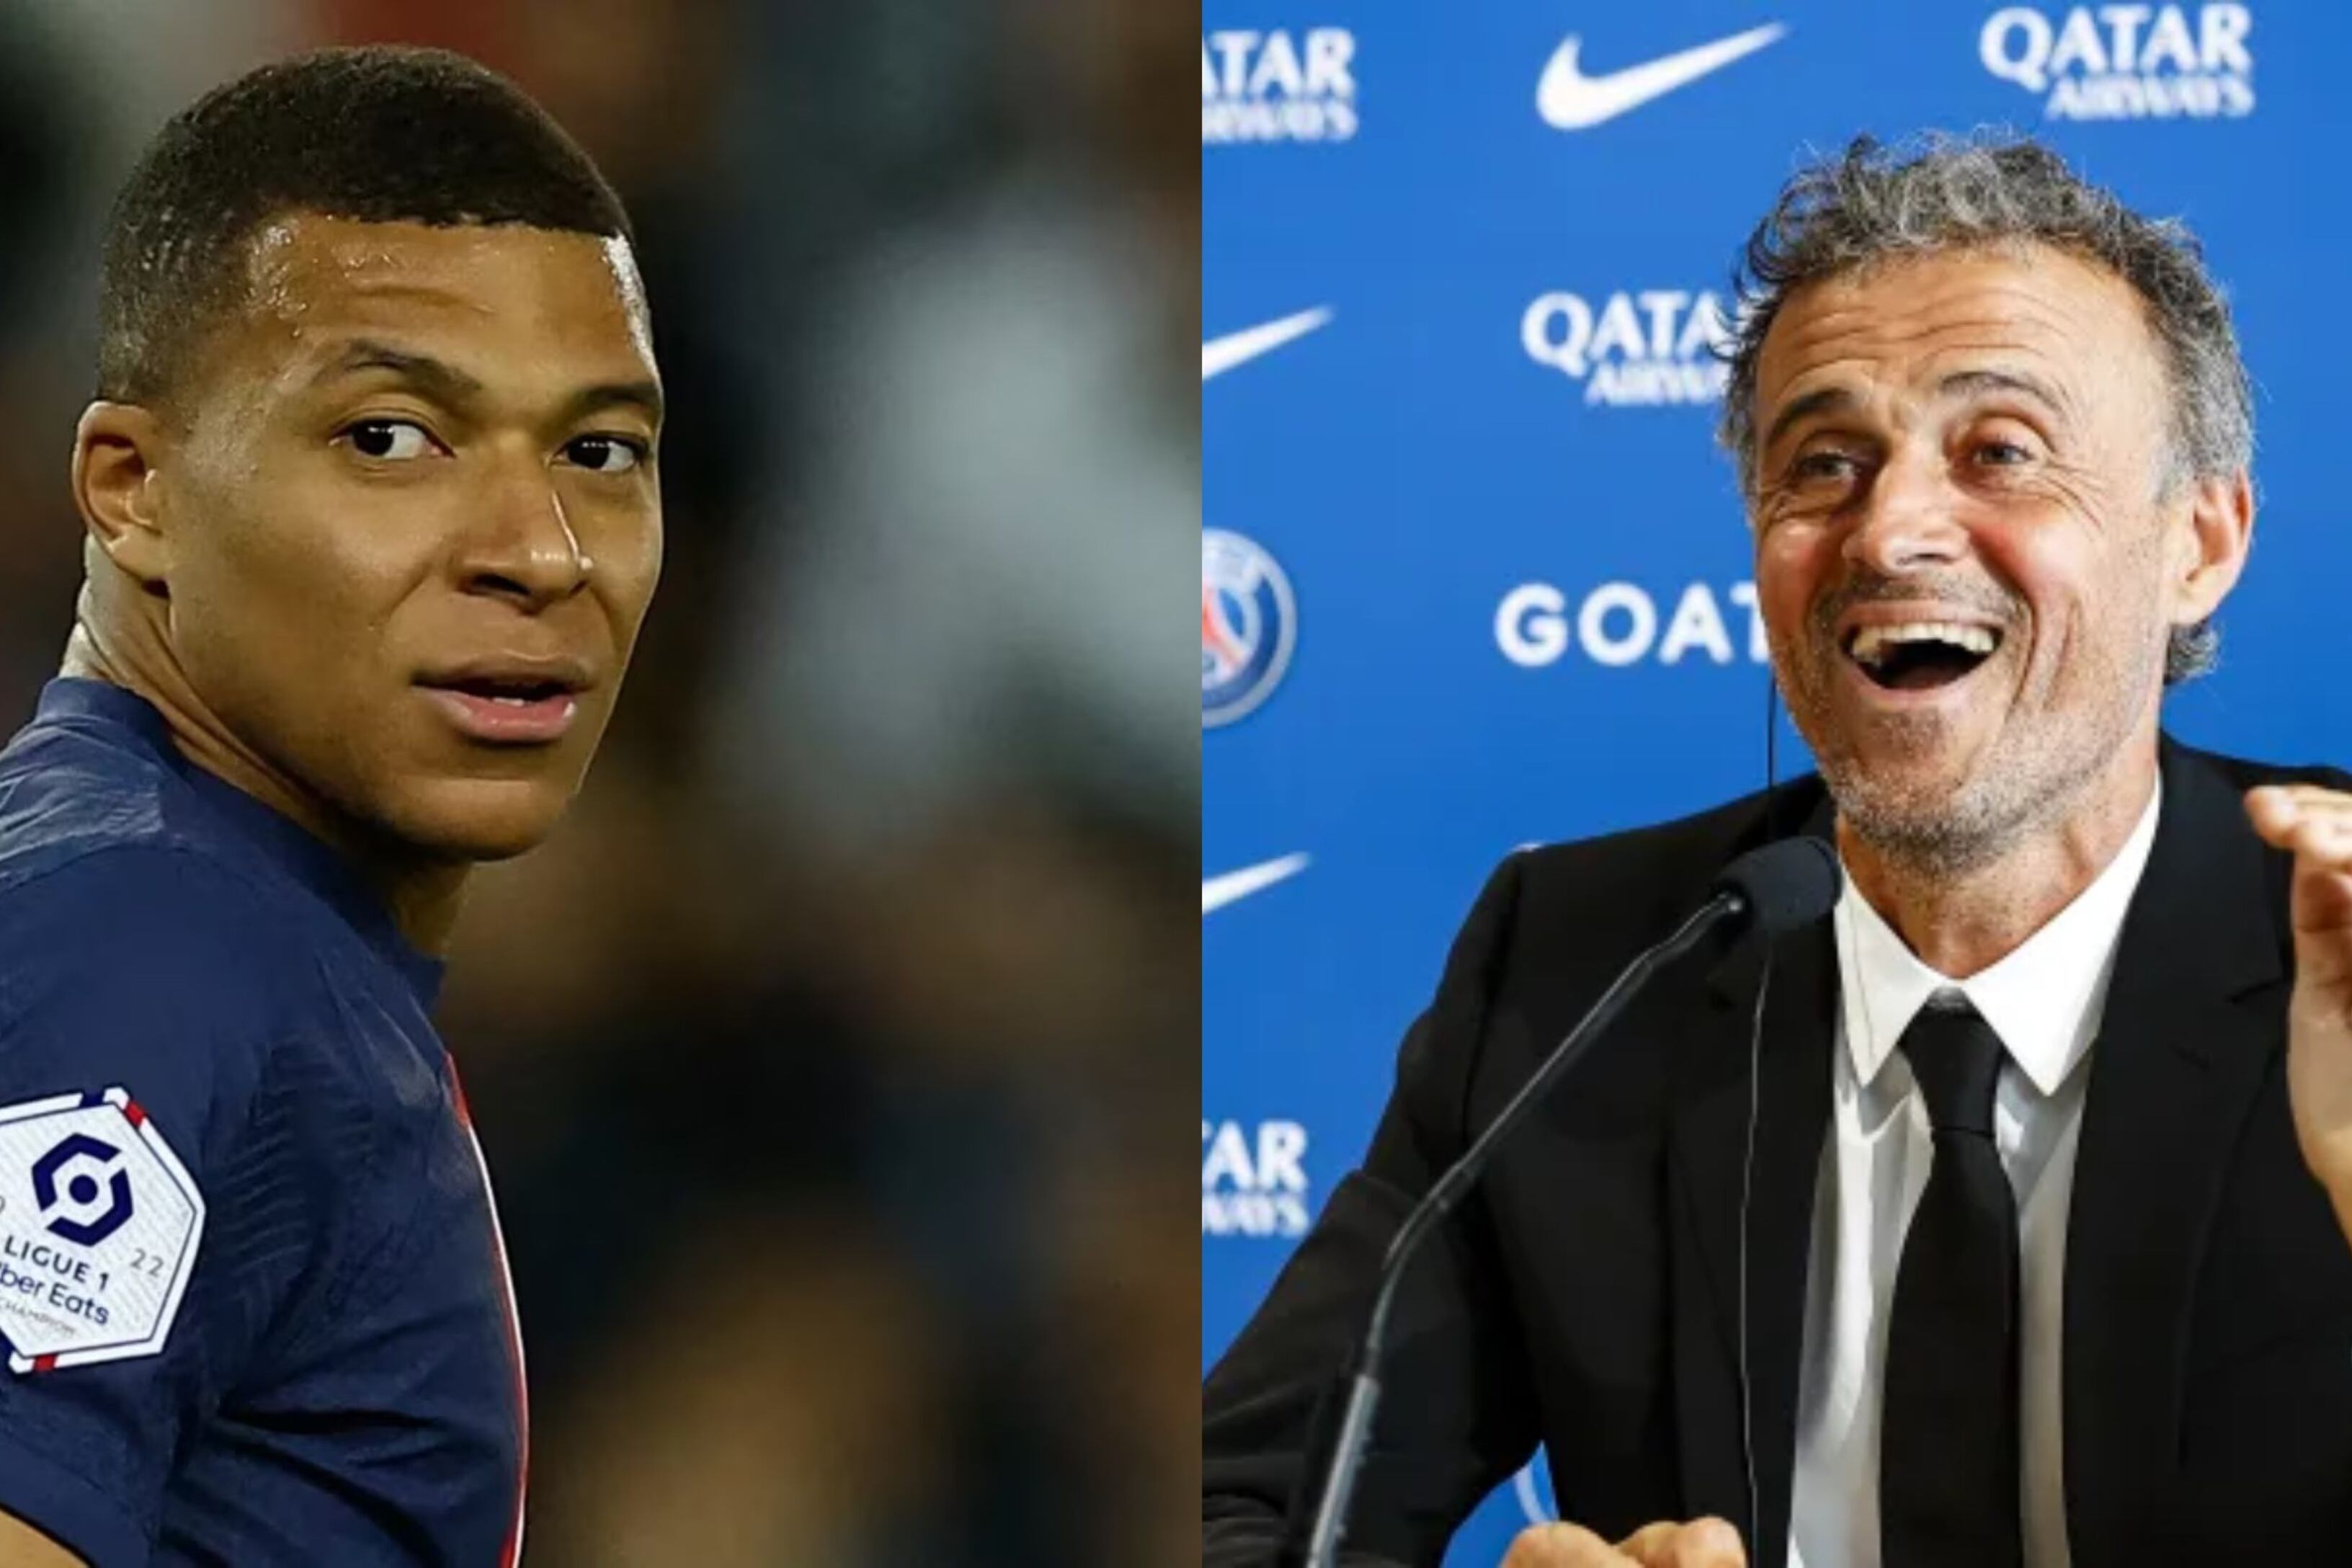 Breaking news, Mbappé's decision to leave PSG if they're eliminated from the Champions League